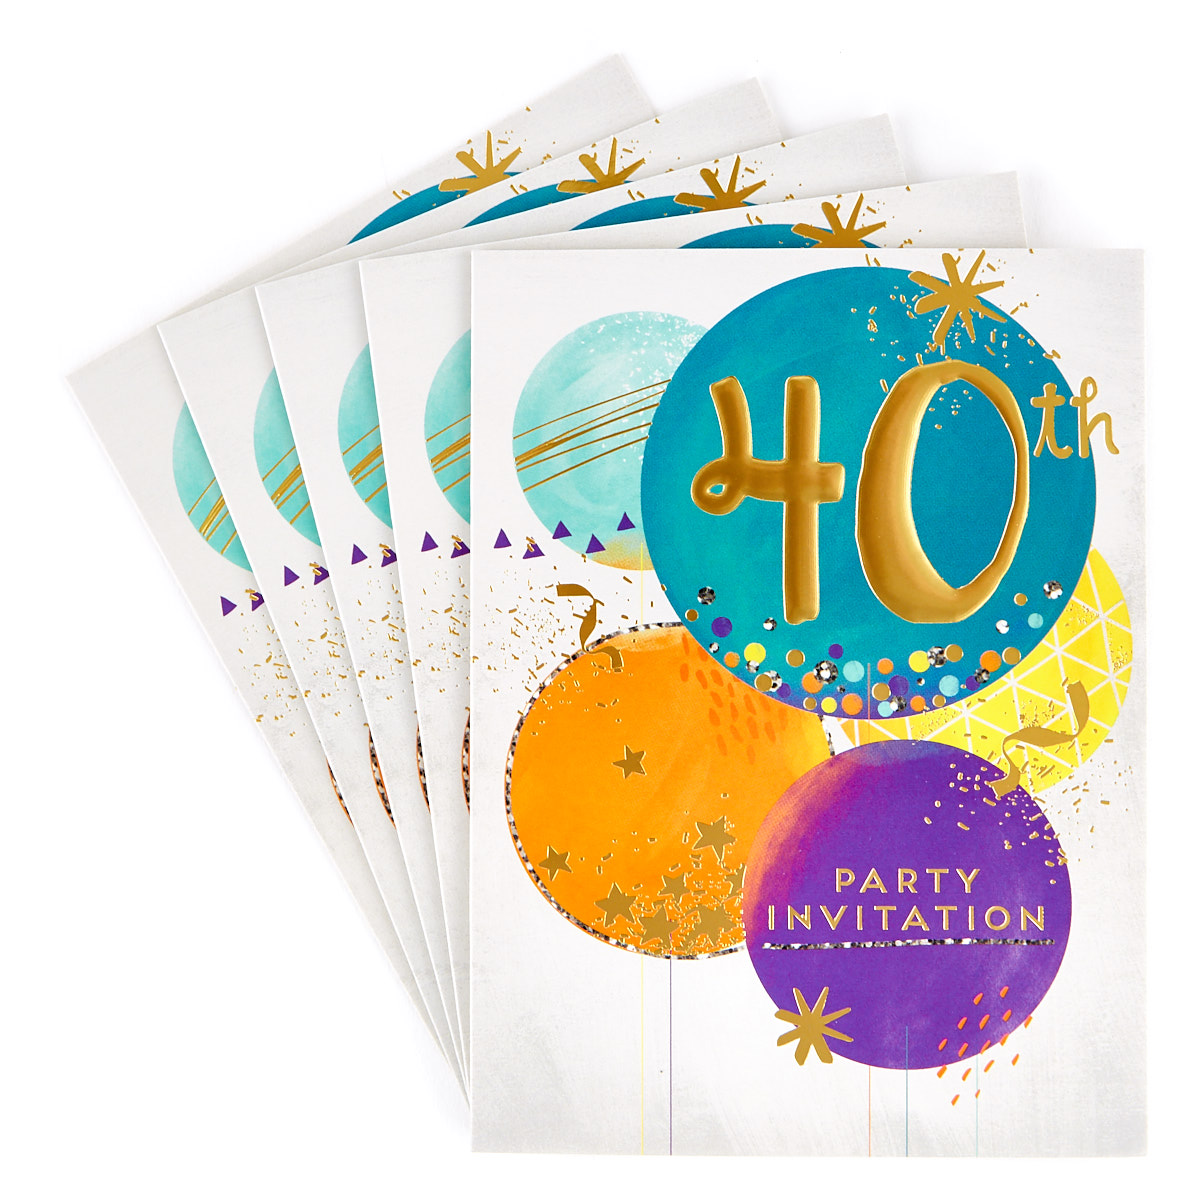 40th Birthday Party Invitation Cards, Pack Of 10